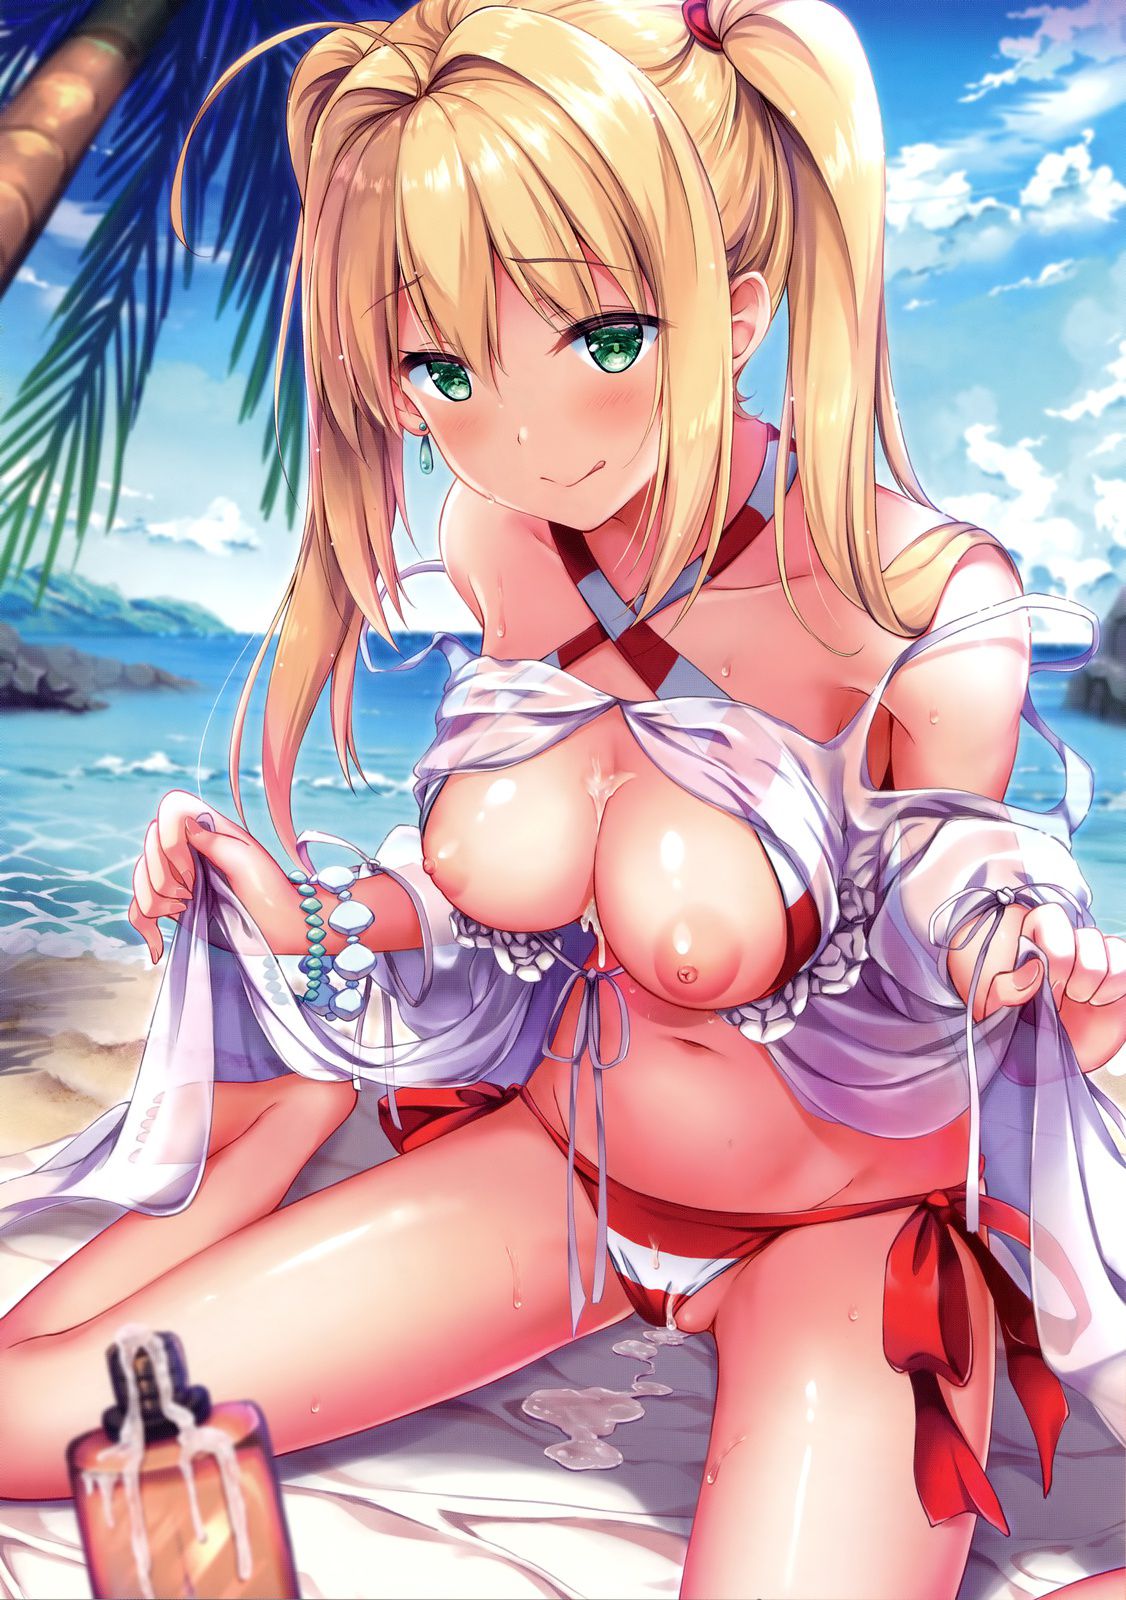 [Secondary erotic] Click here for a summary of erotic images of Nero Claudius in the Fate series 12